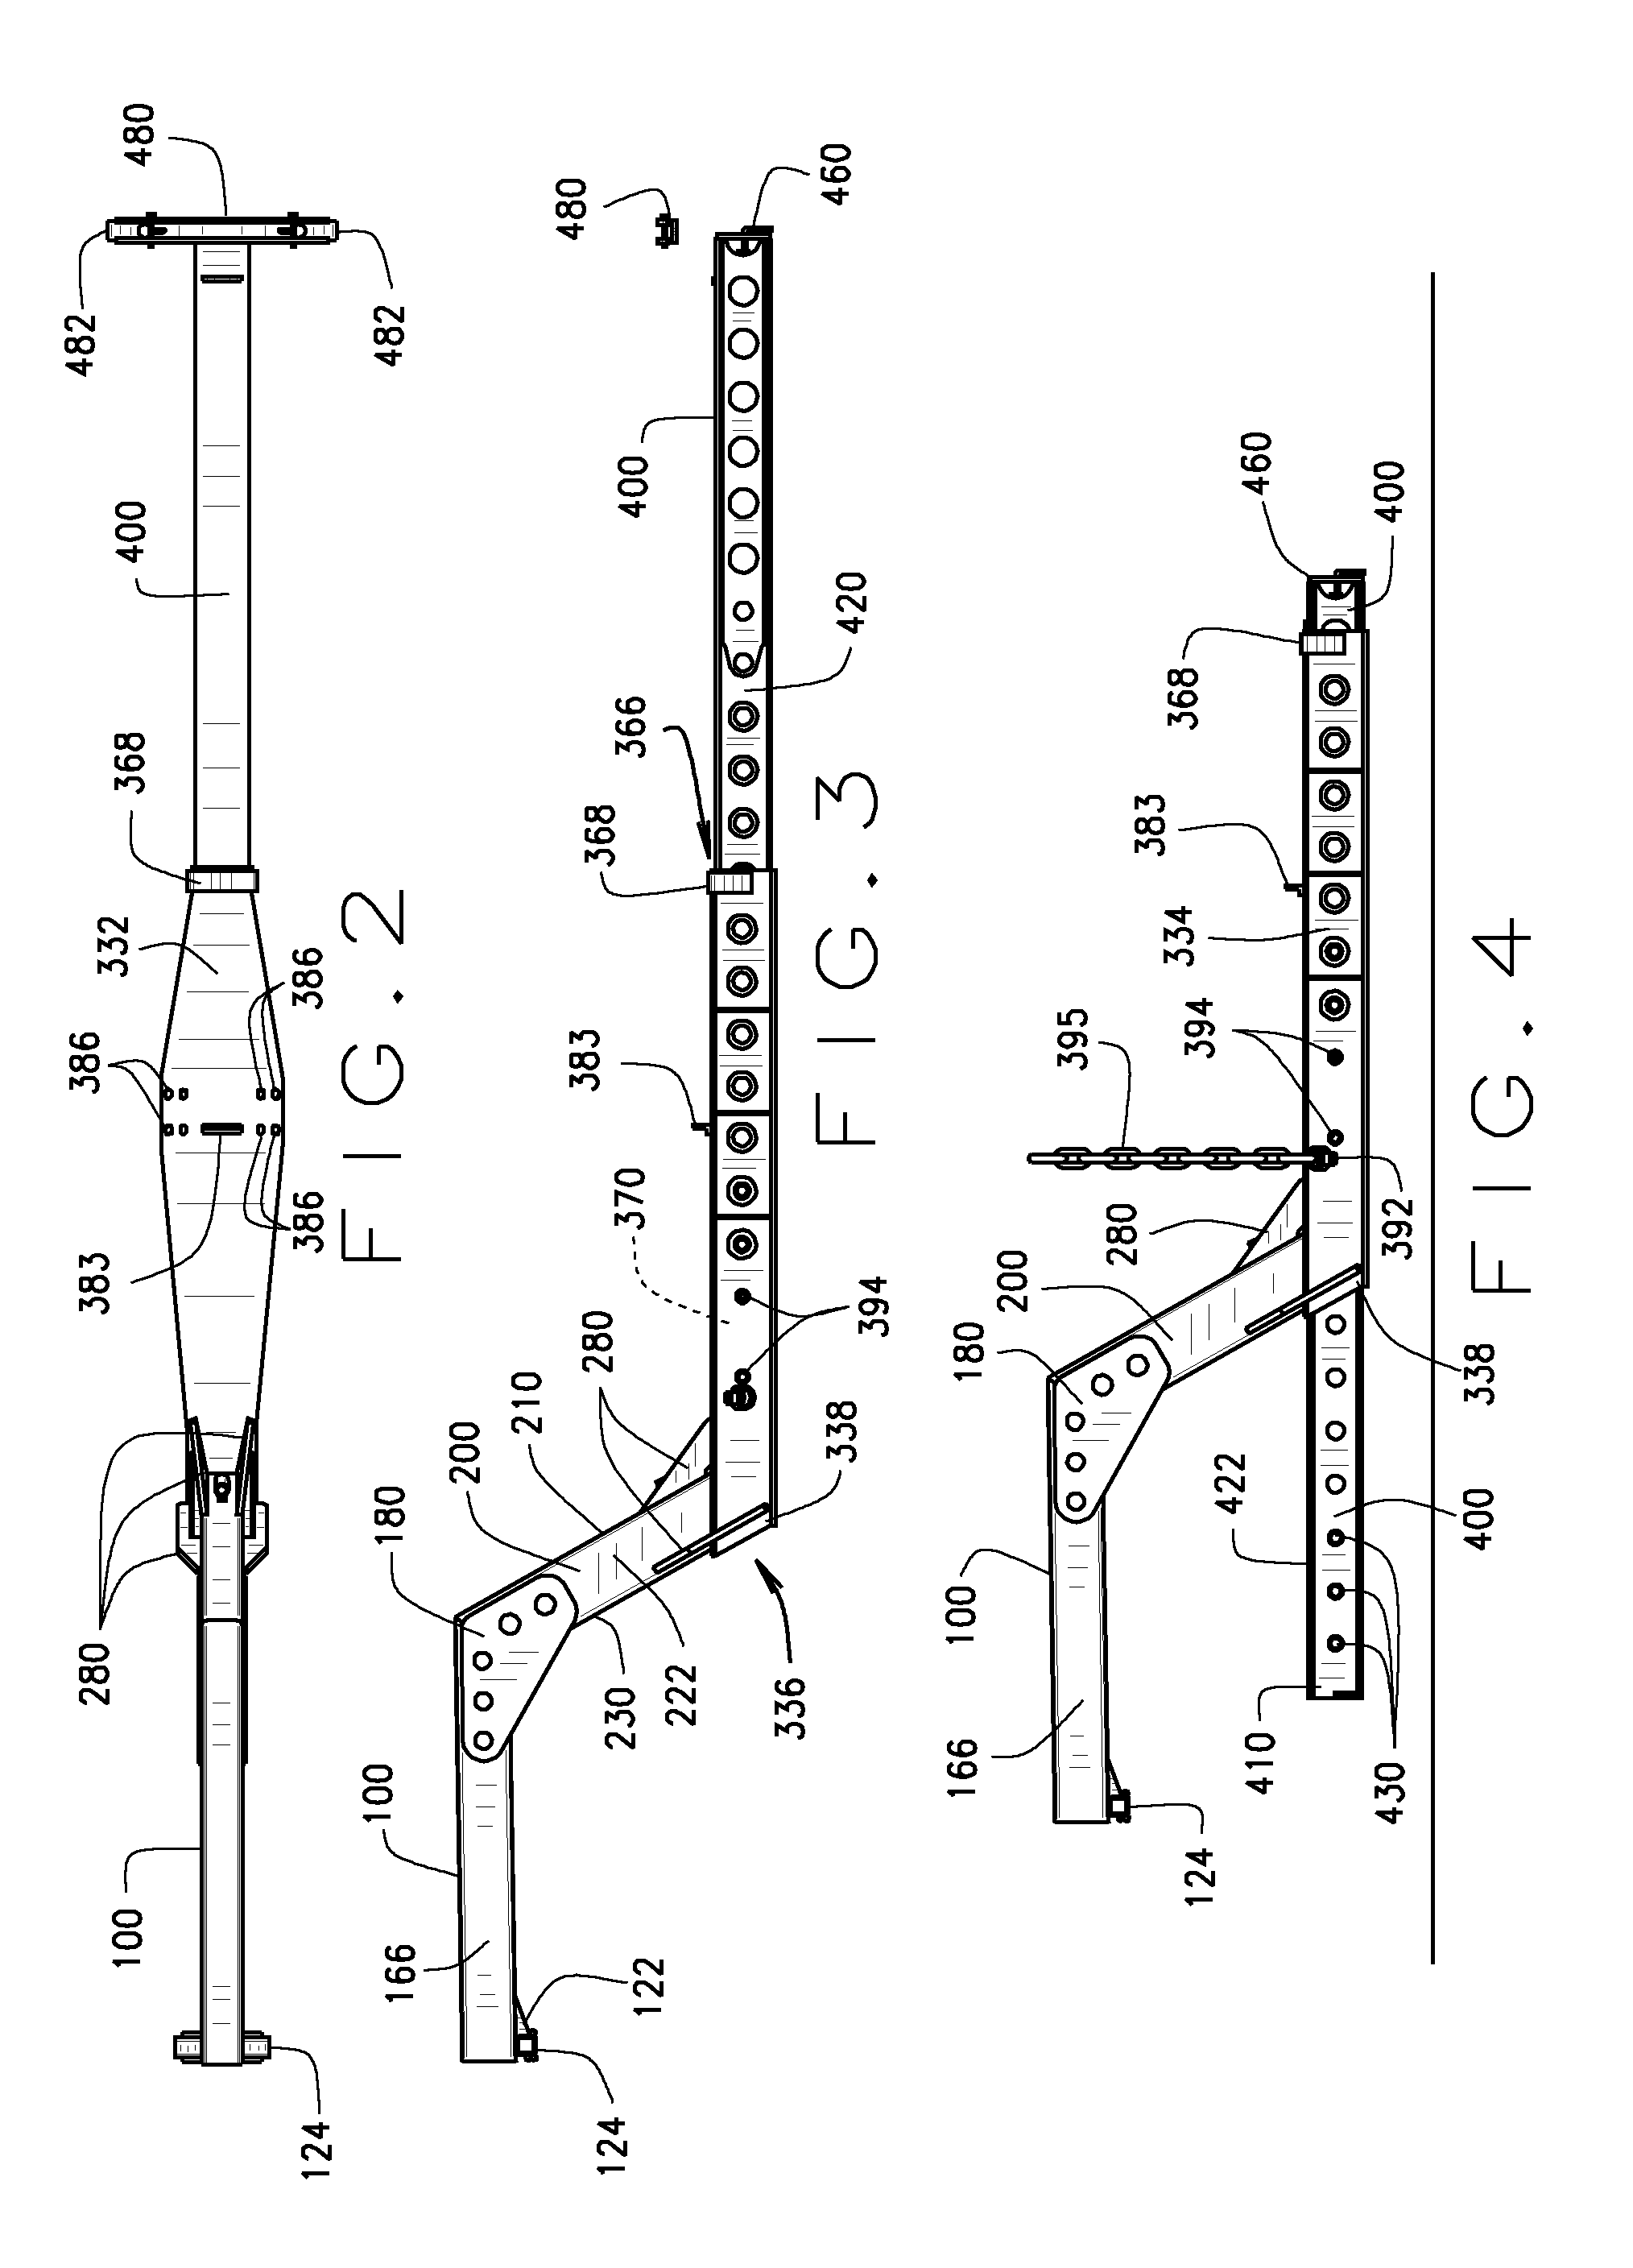 Truck towing system and assembly